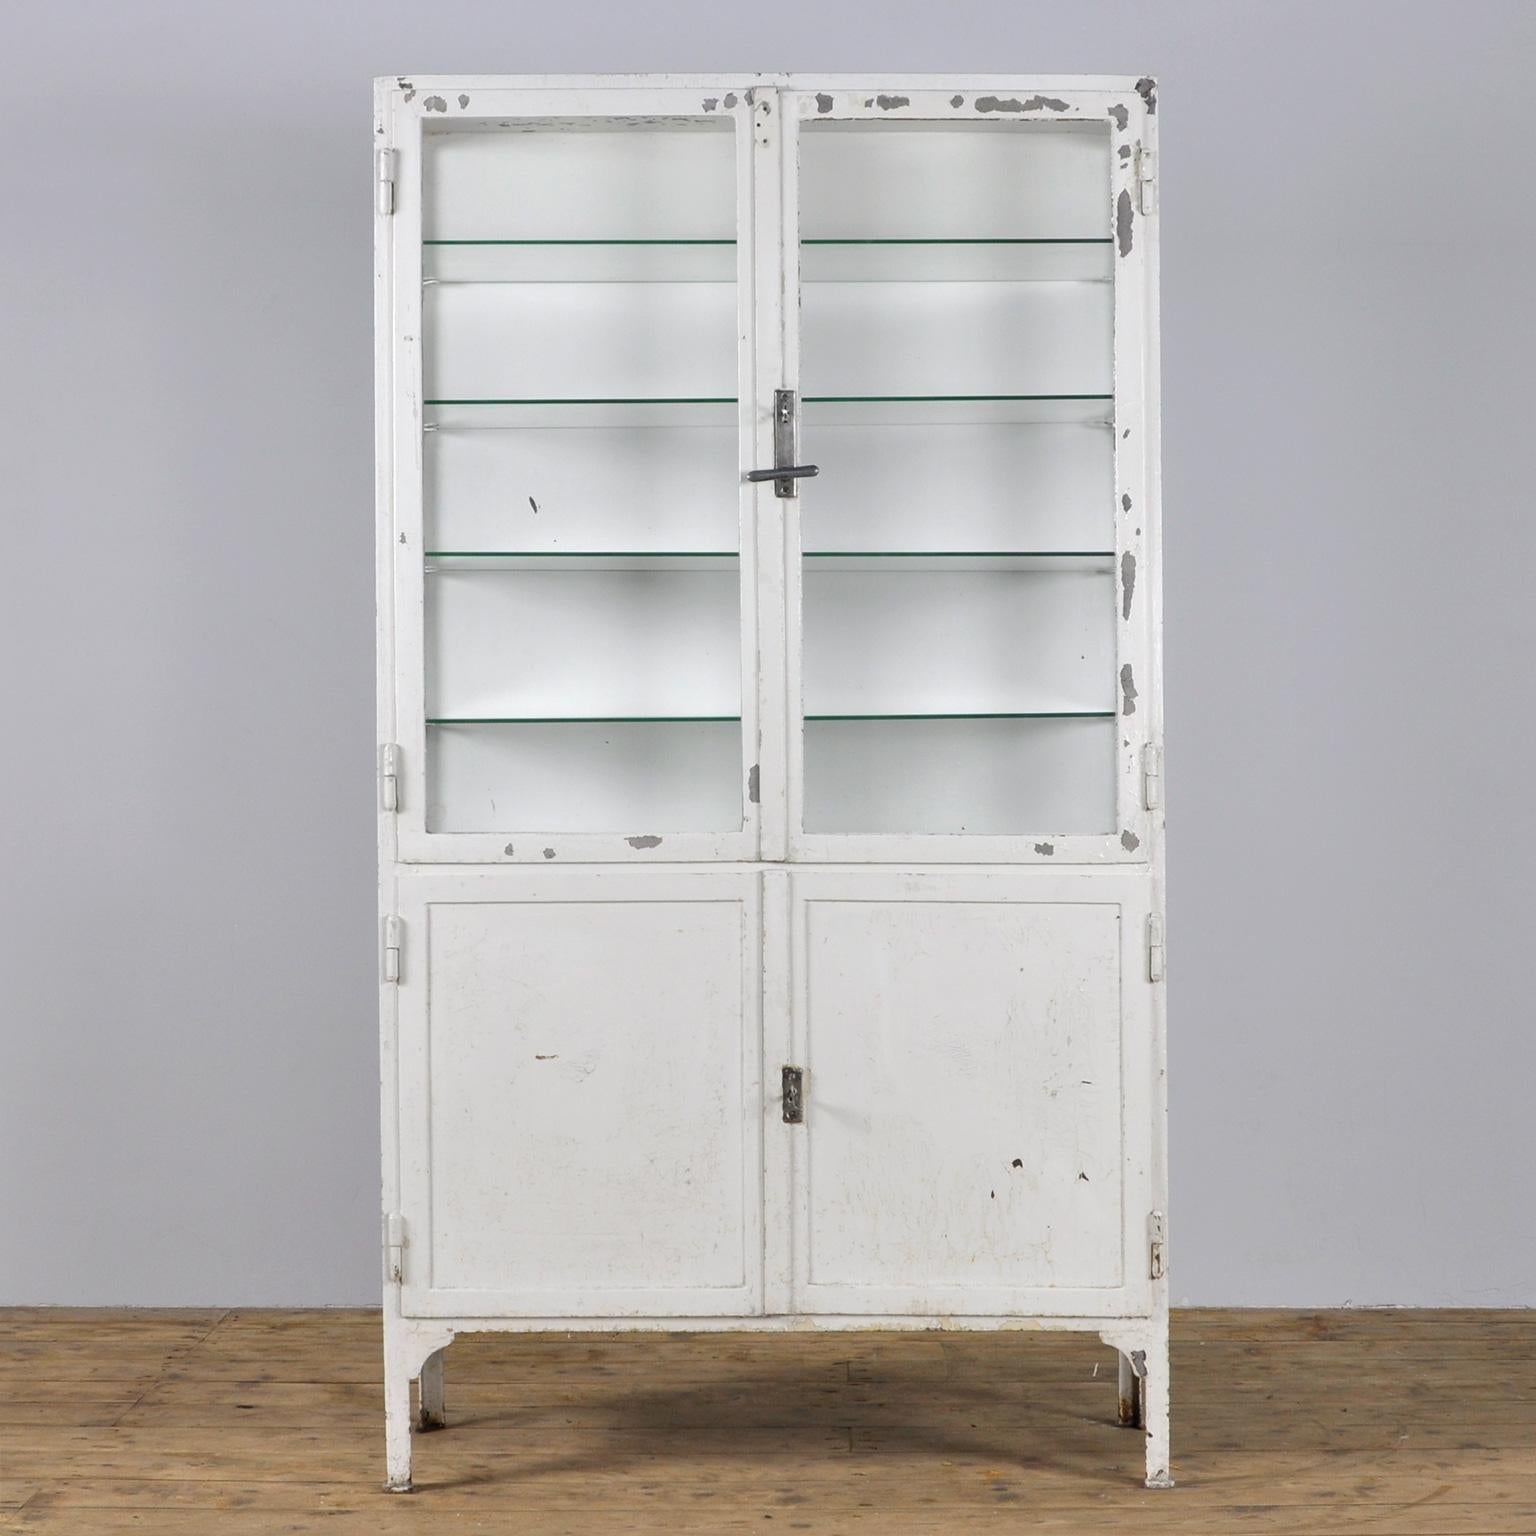 This former medical cabinet was produced in the 1940s in Hungary. It is made of thick iron and antique glass. In the upper part, there are four glass shelves. The original locks are in perfect working condition.